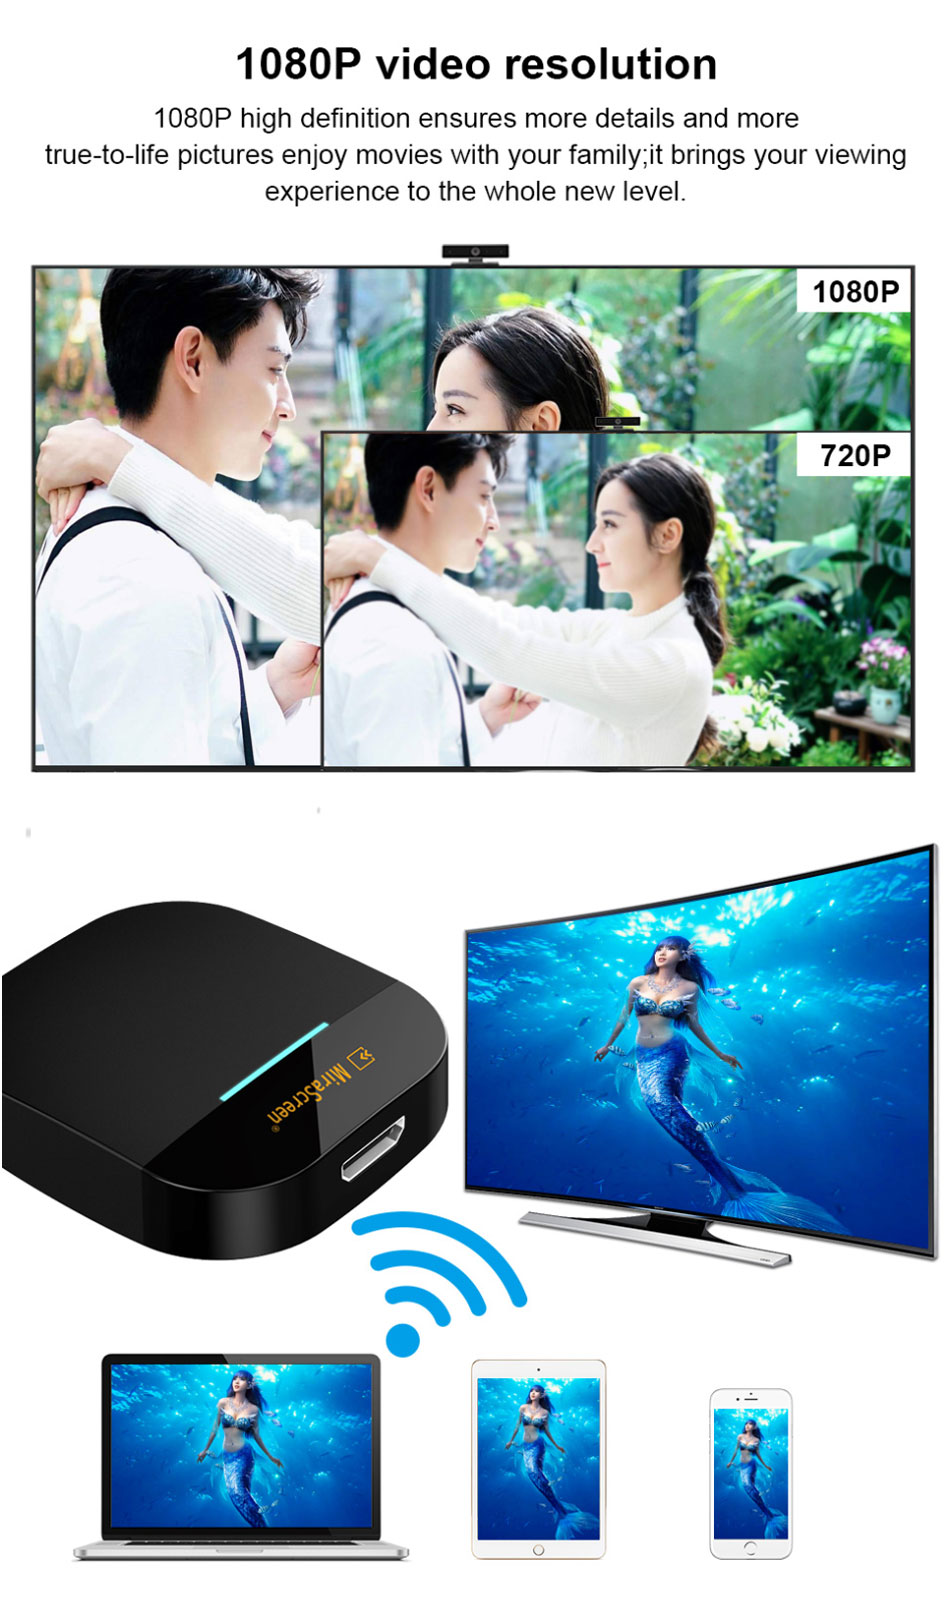 Mirascreen-G5-24G-5G-Wireless-1080P-HD-Display-Dongle-TV-Stick-for-Air-Play-DLNA-Miracast-1553548-3